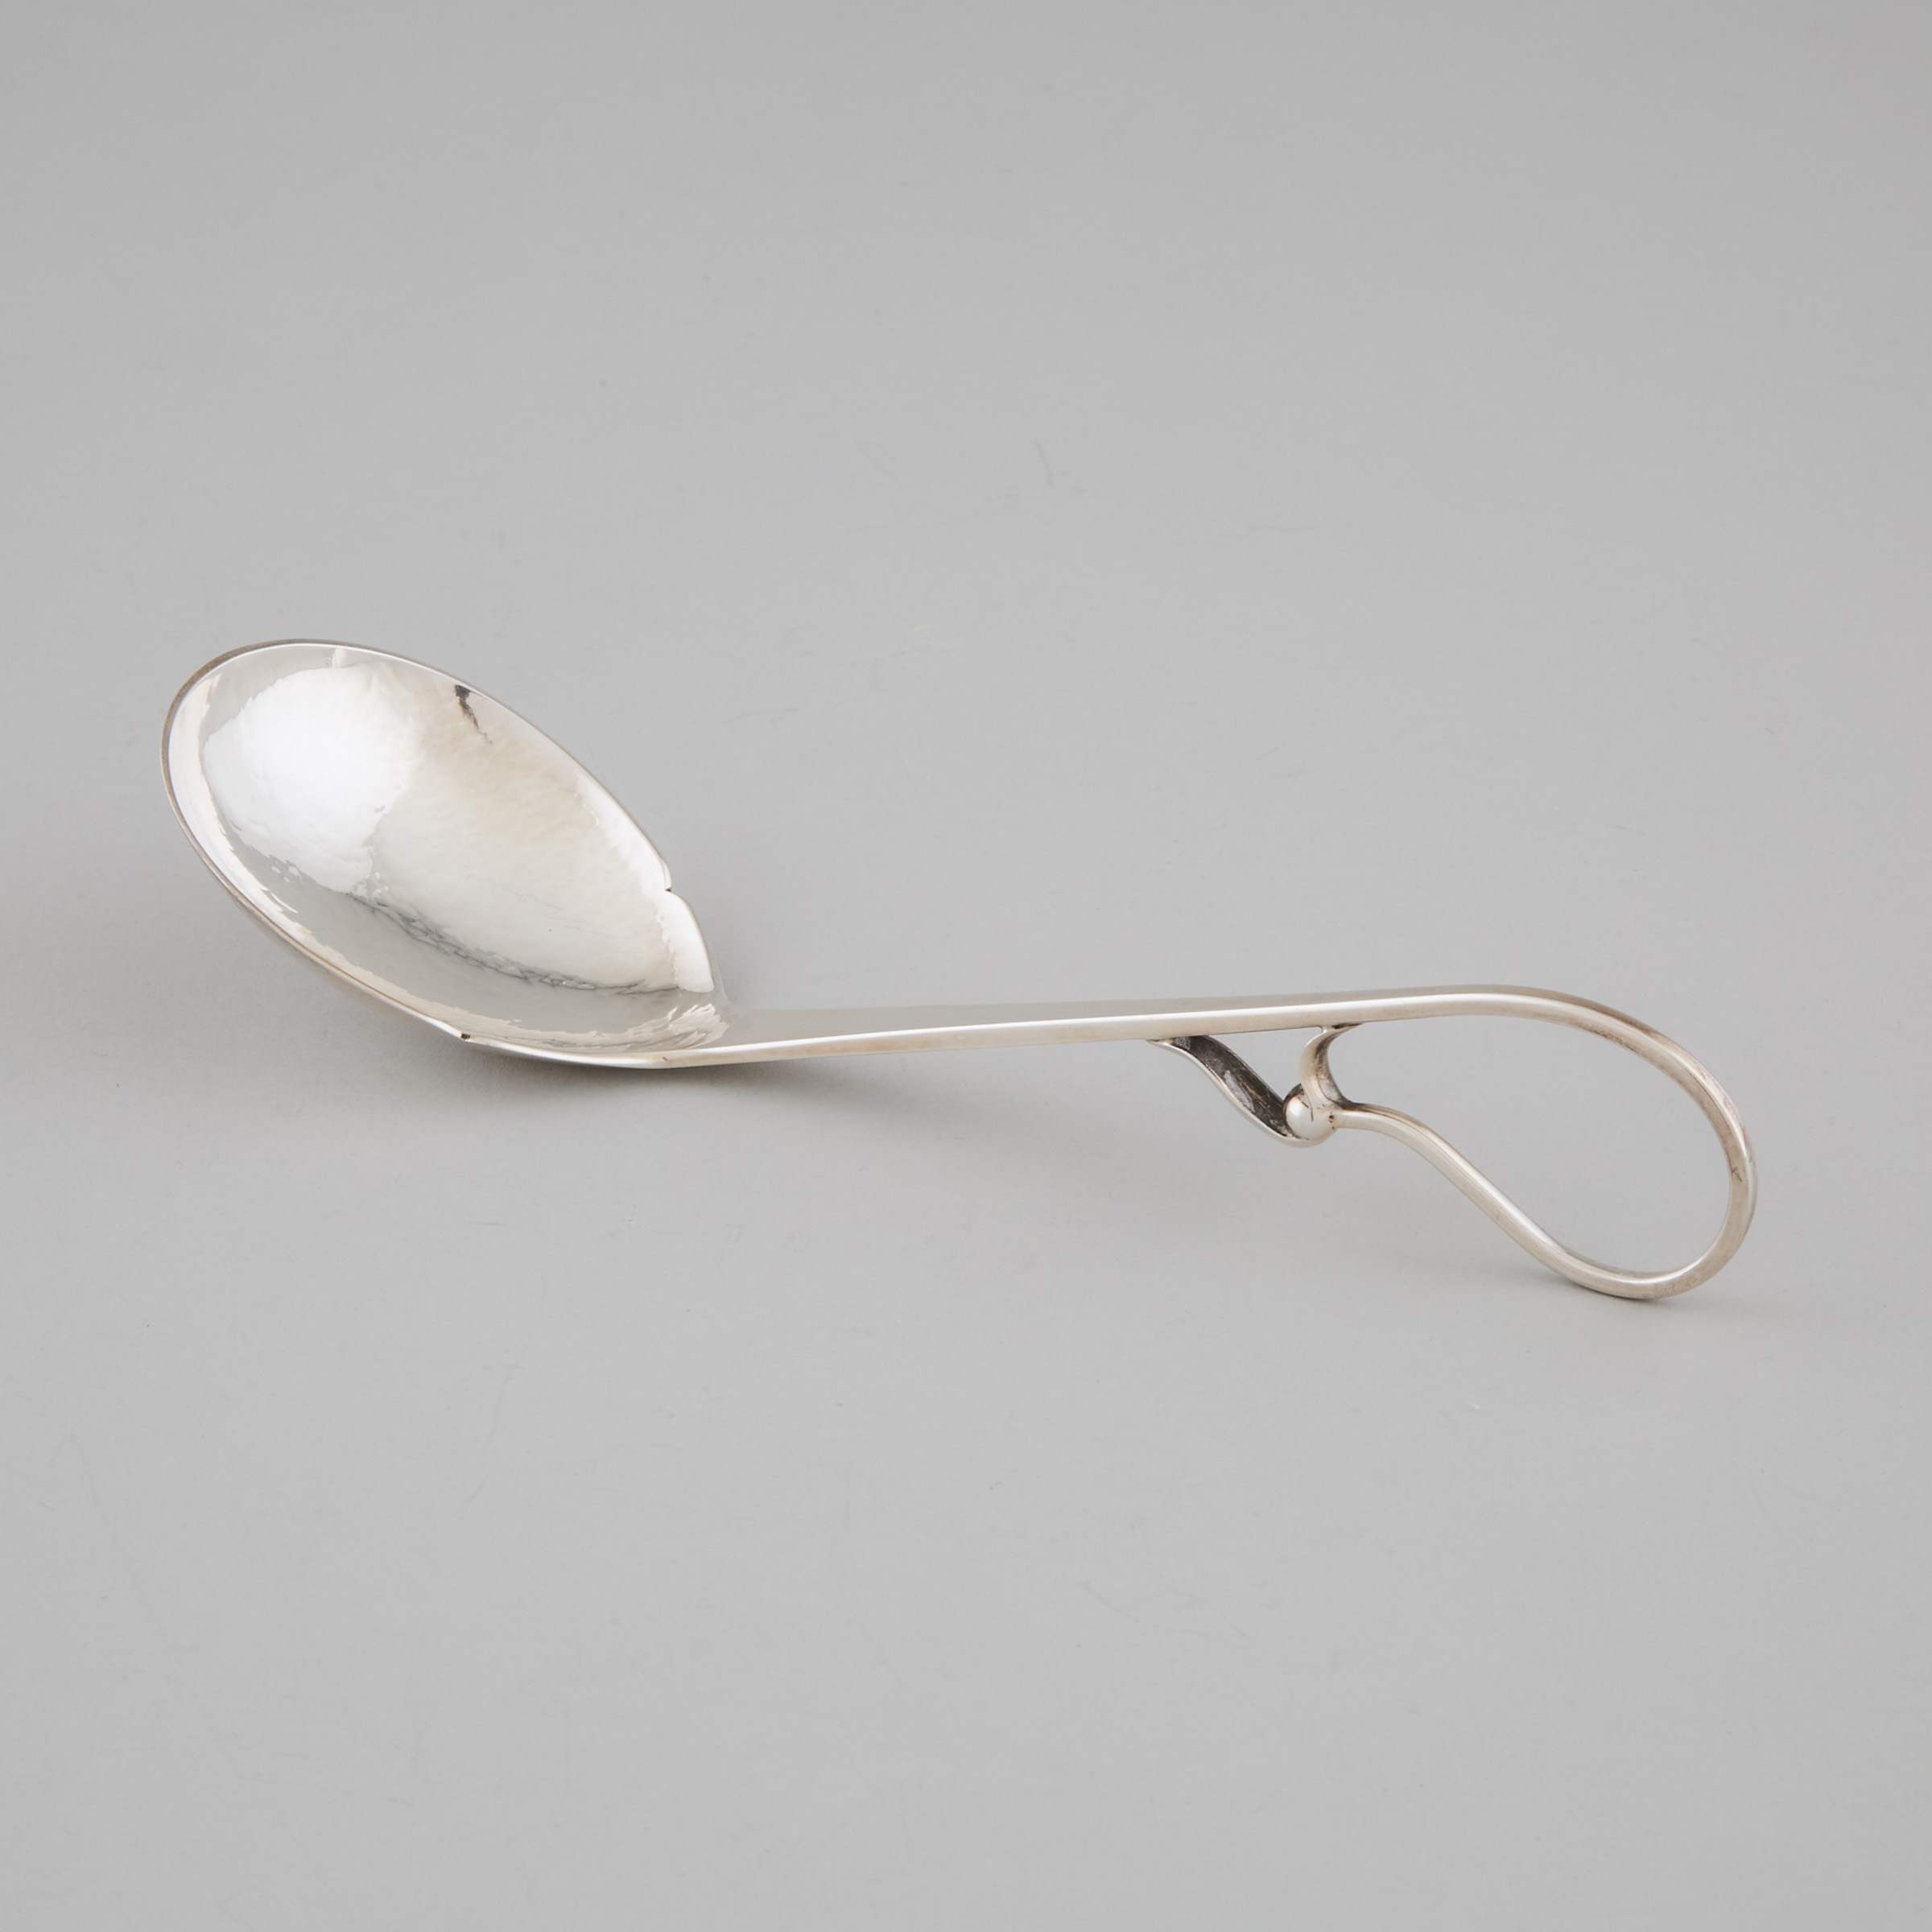 Canadian Silver Berry Spoon, Carl